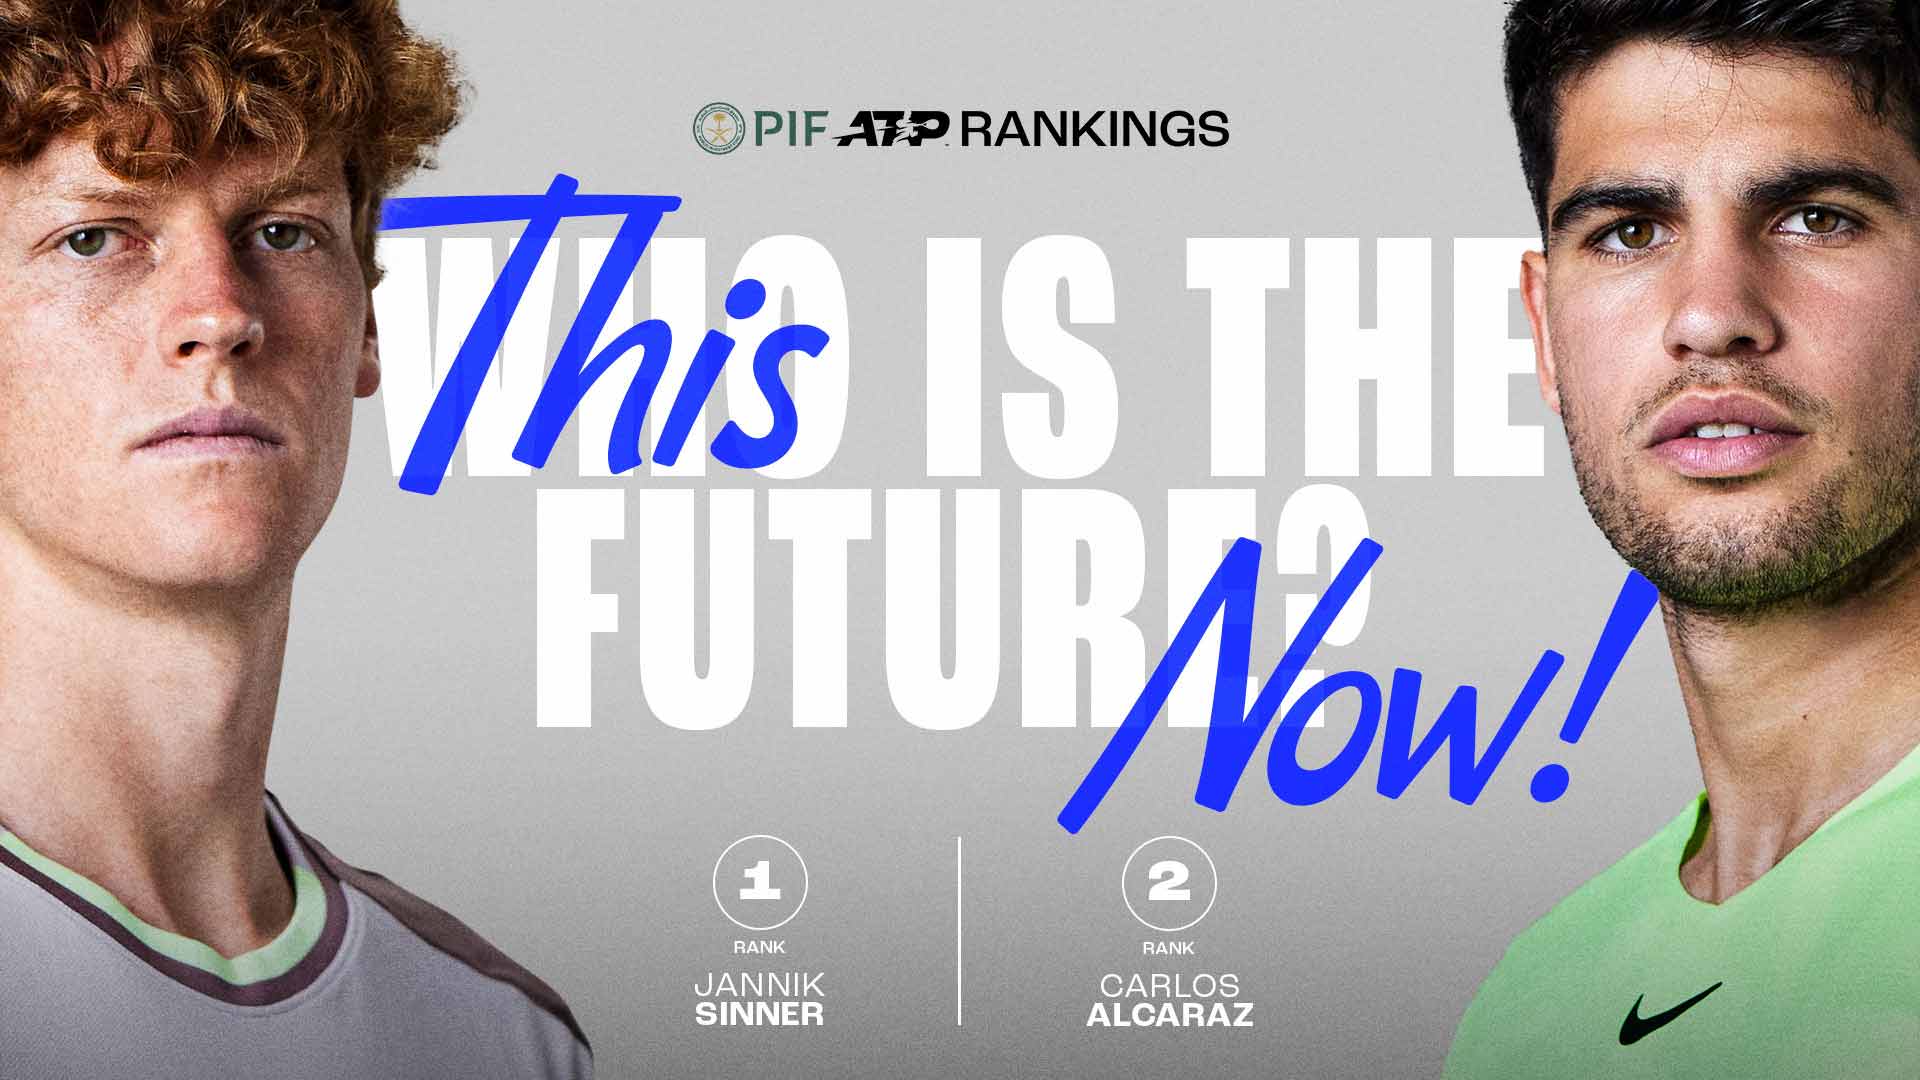 Jannik Sinner and Carlos Alcaraz are No. 1 and No. 2, respectively, in the PIF ATP Rankings.